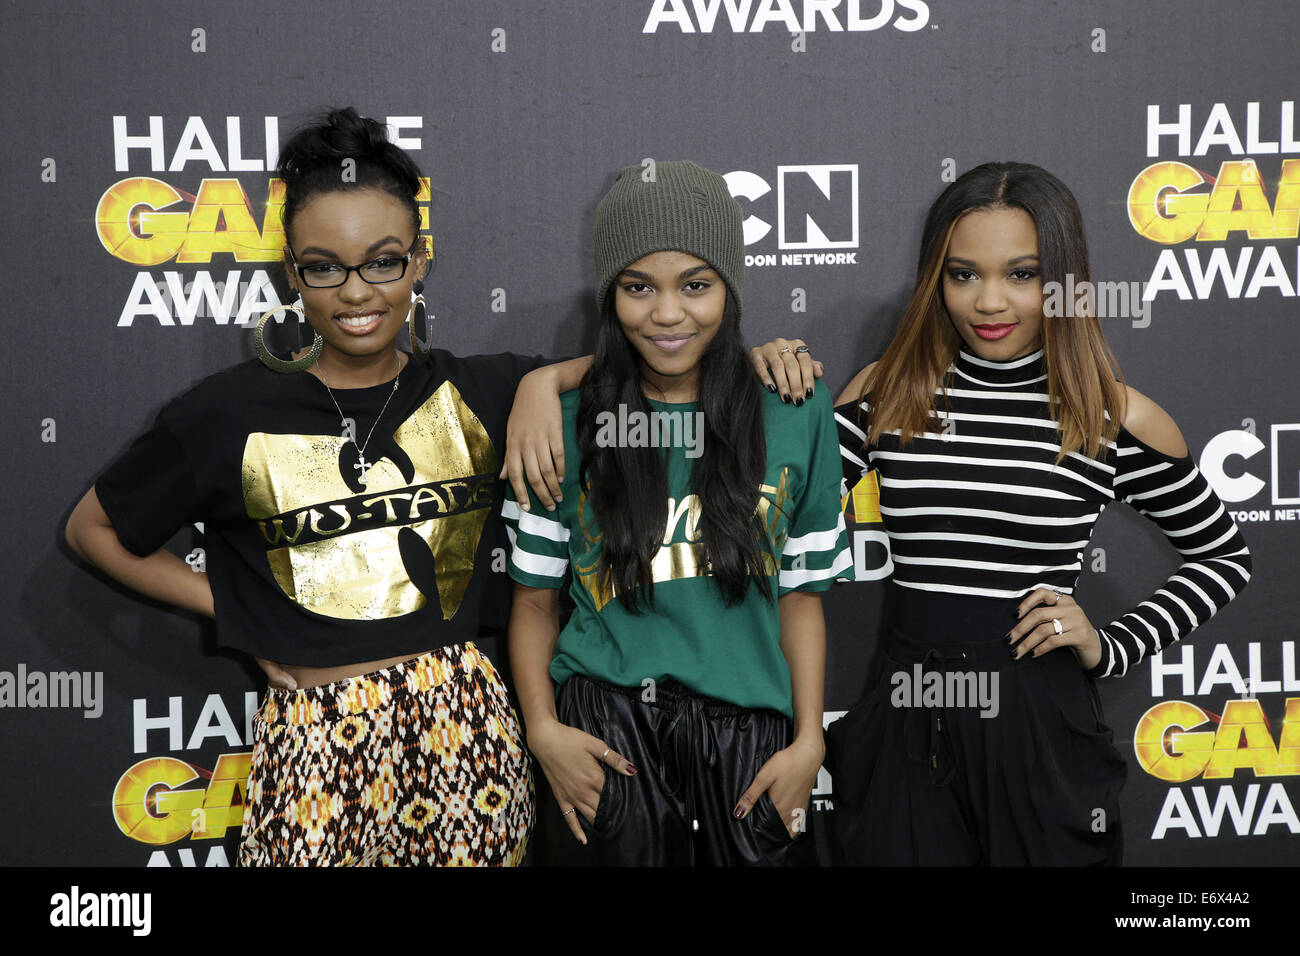 Cartoon Network's Hall of Game Awards au Barker Hangar - Arrivées comprend : les McClain Sisters,Sierra McClain,China Anne McClain,Lauryn McClain Où : Los Angeles, California, United States Quand : 15 Mars 2014 Banque D'Images